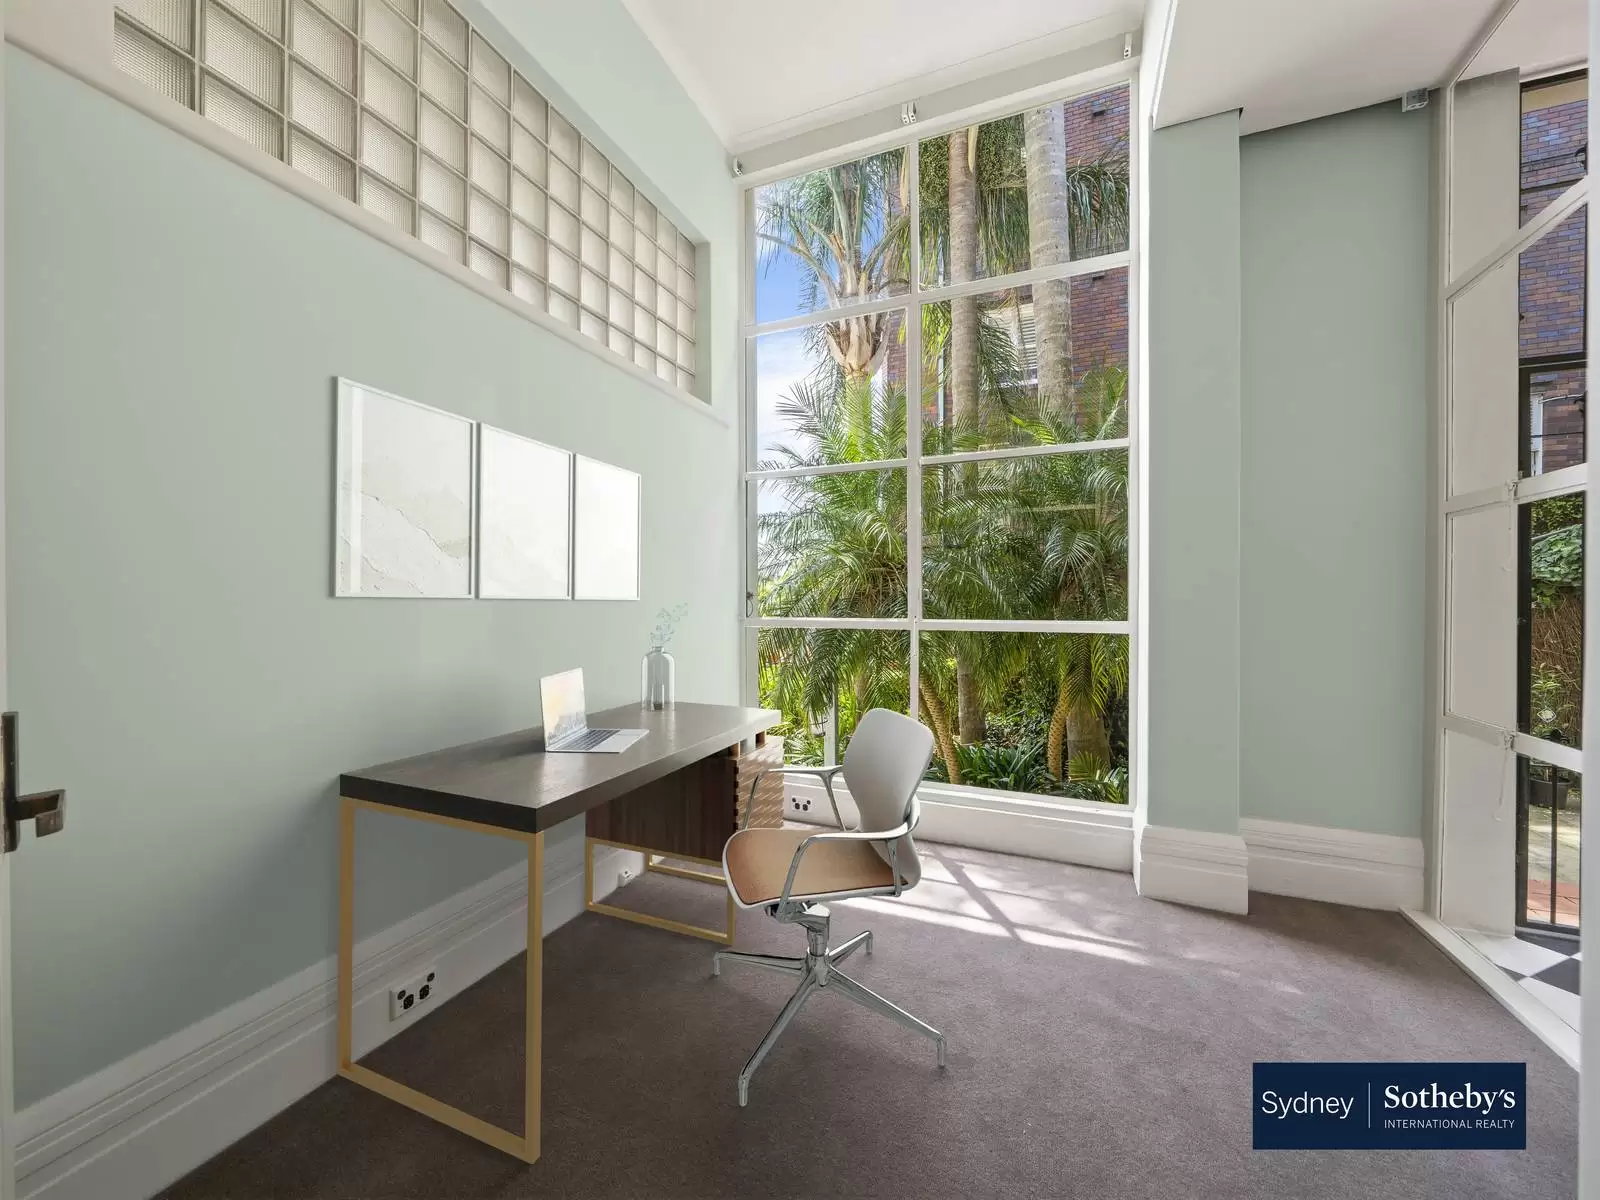 9/16-18 Wolseley Road, Point Piper For Lease by Sydney Sotheby's International Realty - image 7